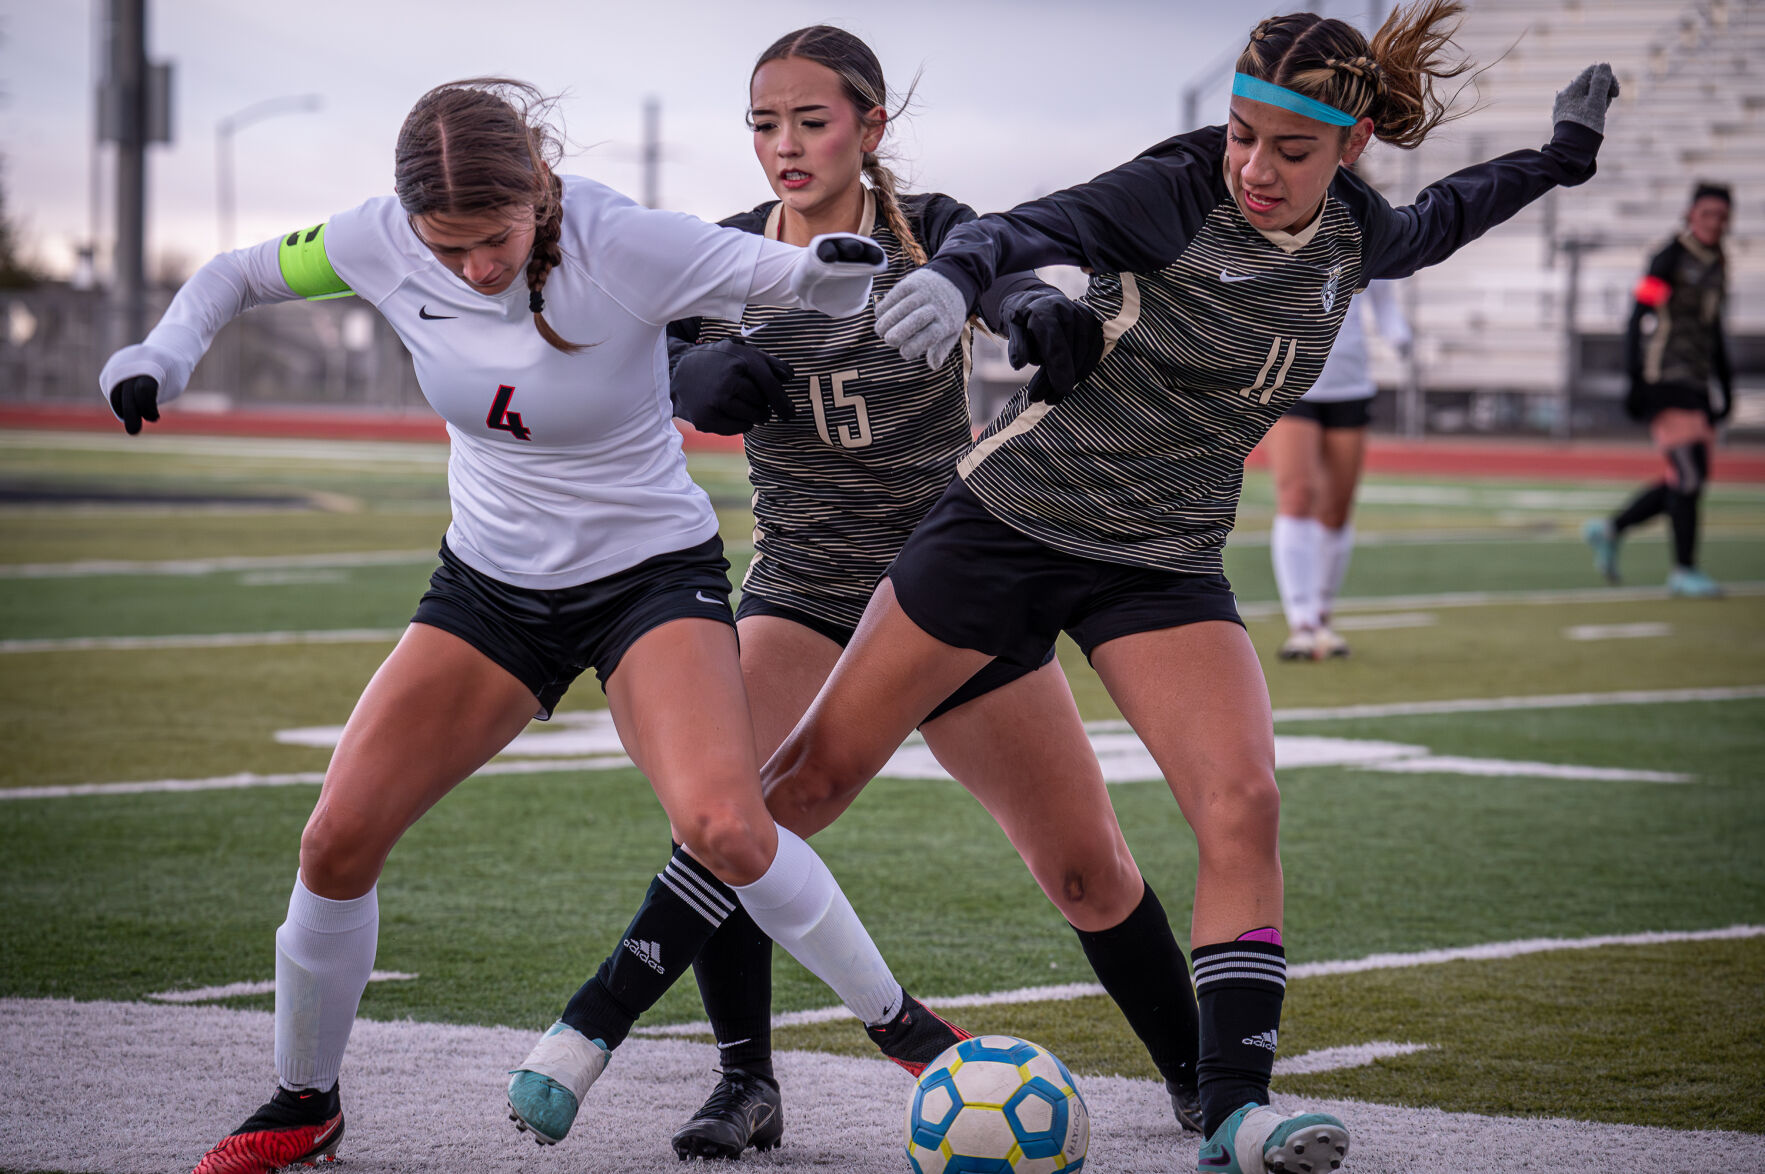 Cheyenne South vs Cheyenne Central: Girls Soccer Ends in Scoreless Draw and Playoff Seed Revealed